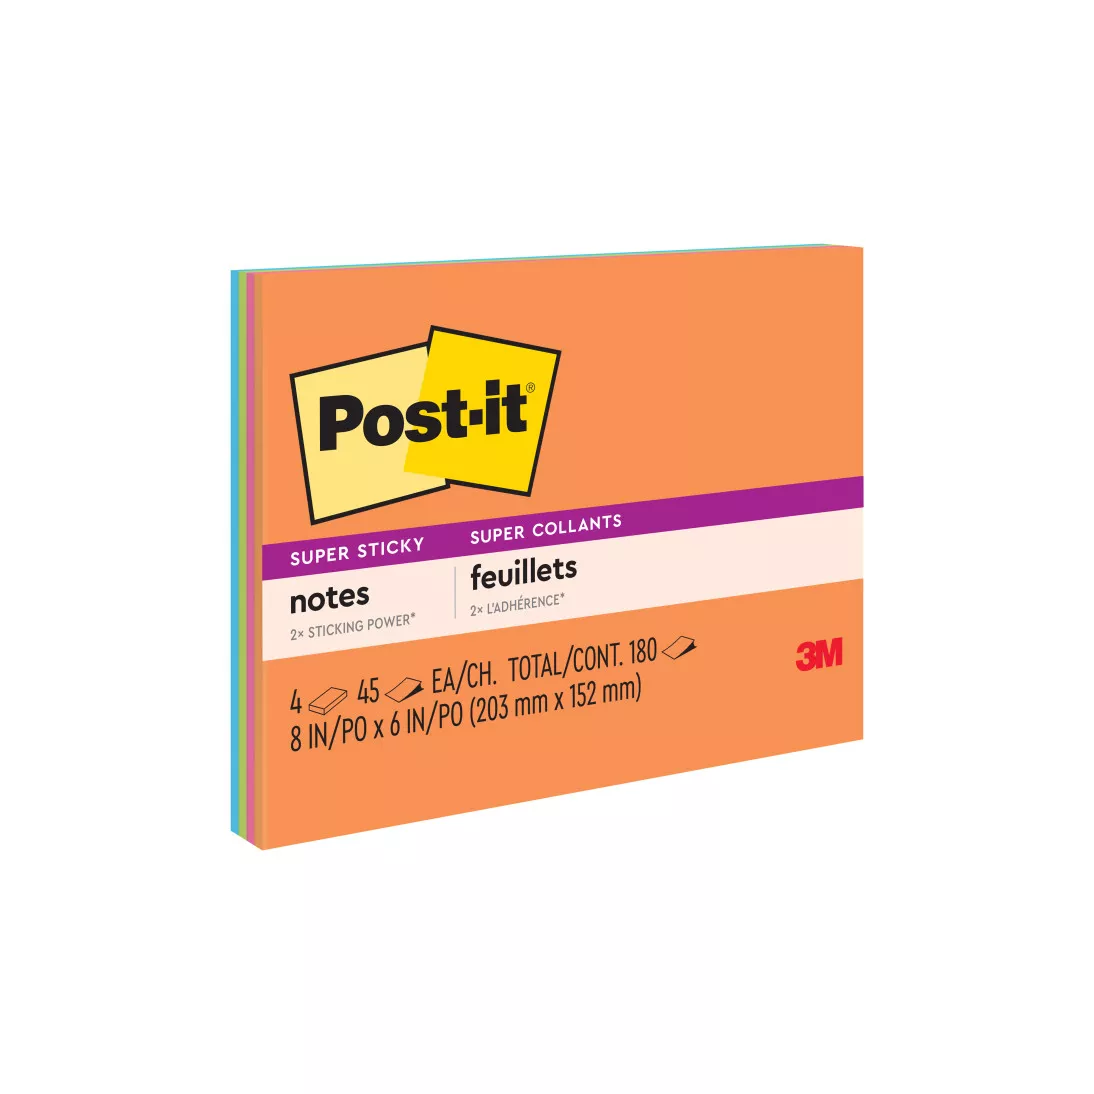 Post-it® Super Sticky Notes 6845-SSP, 8 in x 6 in (203 mm x 152 mm) Rio
de Janeiro Collection, Lined, 4 Pads/Pack